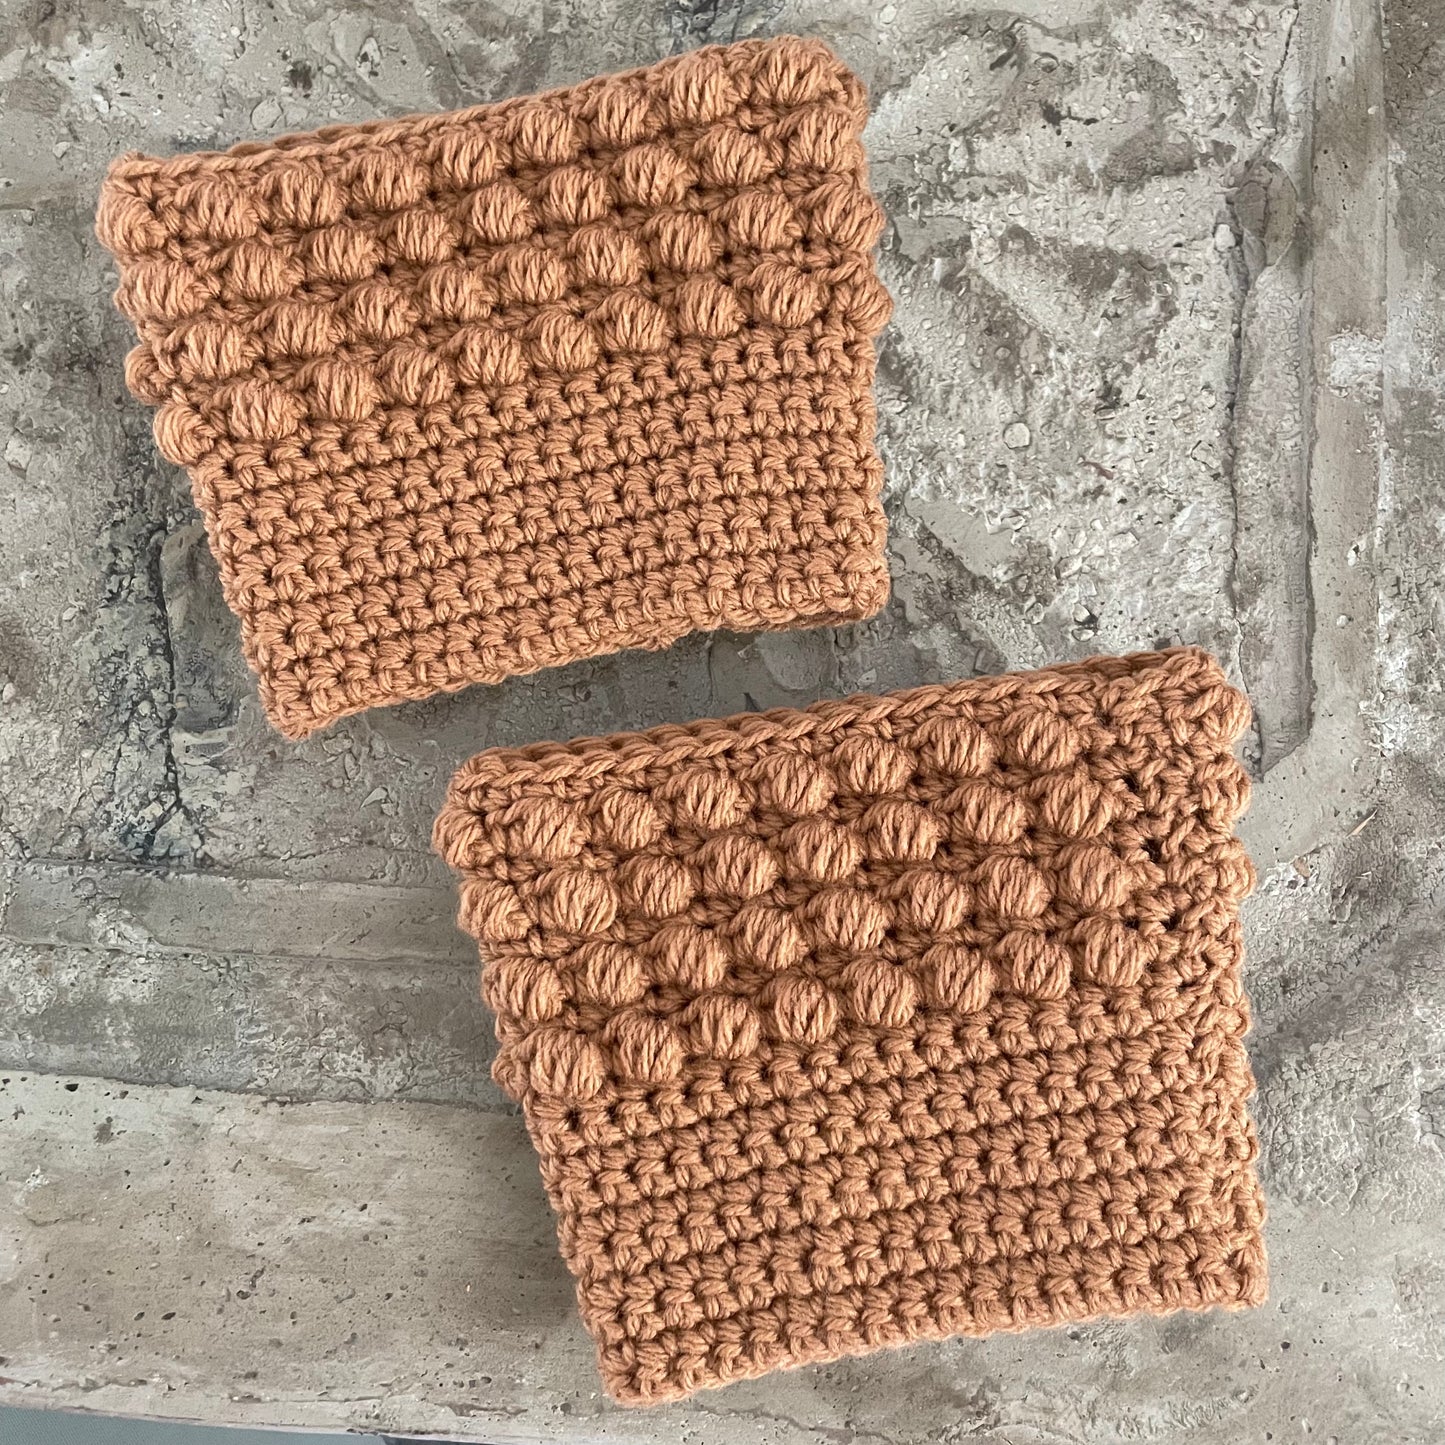 Boot Cuffs in Brown Sugar Puff Stitch 12" Hand Crocheted Knit Fall Winter Hiking Indoor Outdoor Cozy Leg Warmers